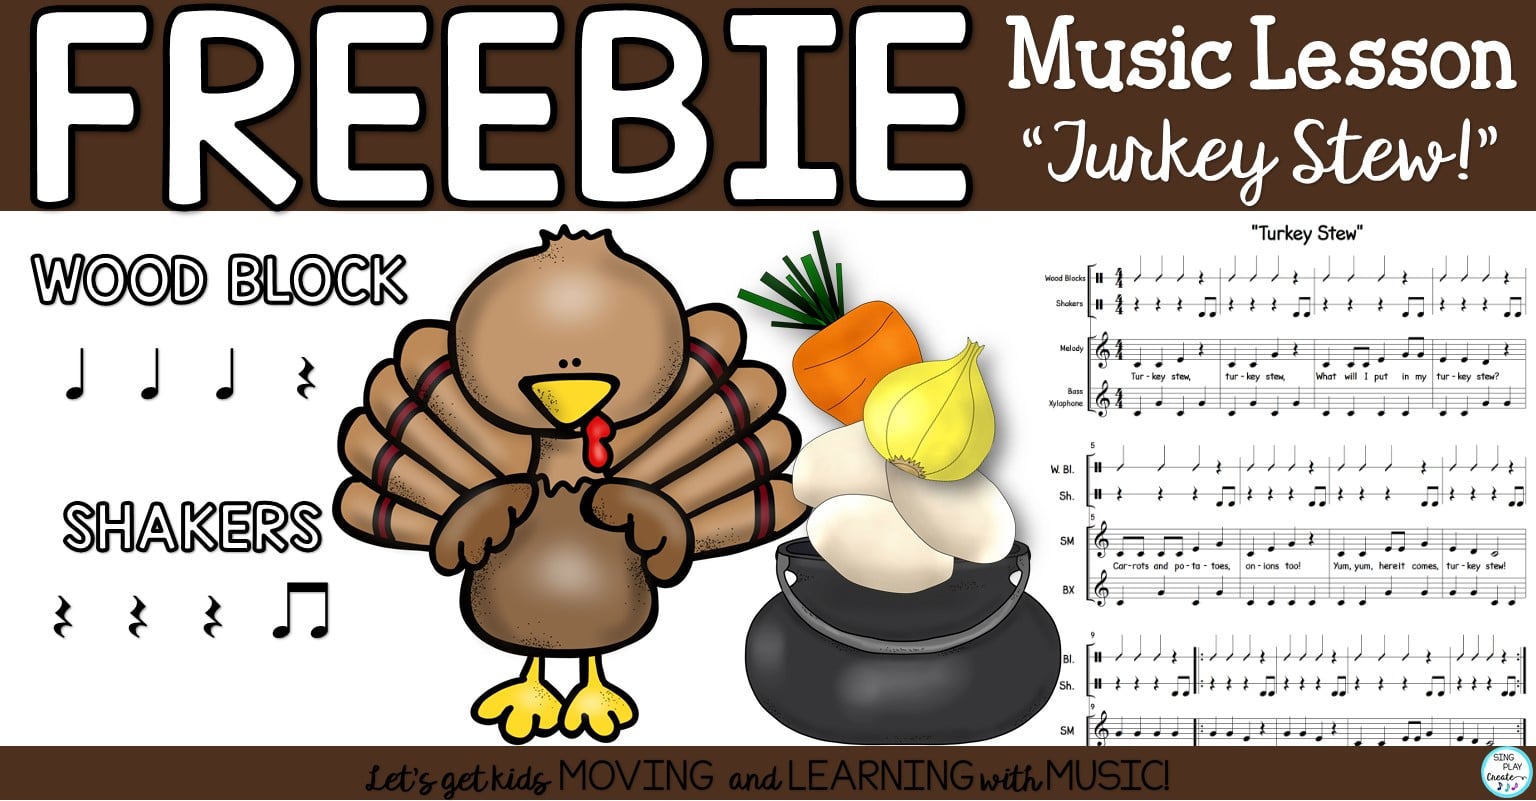 You are currently viewing Music Lesson Freebie “Turkey Stew”